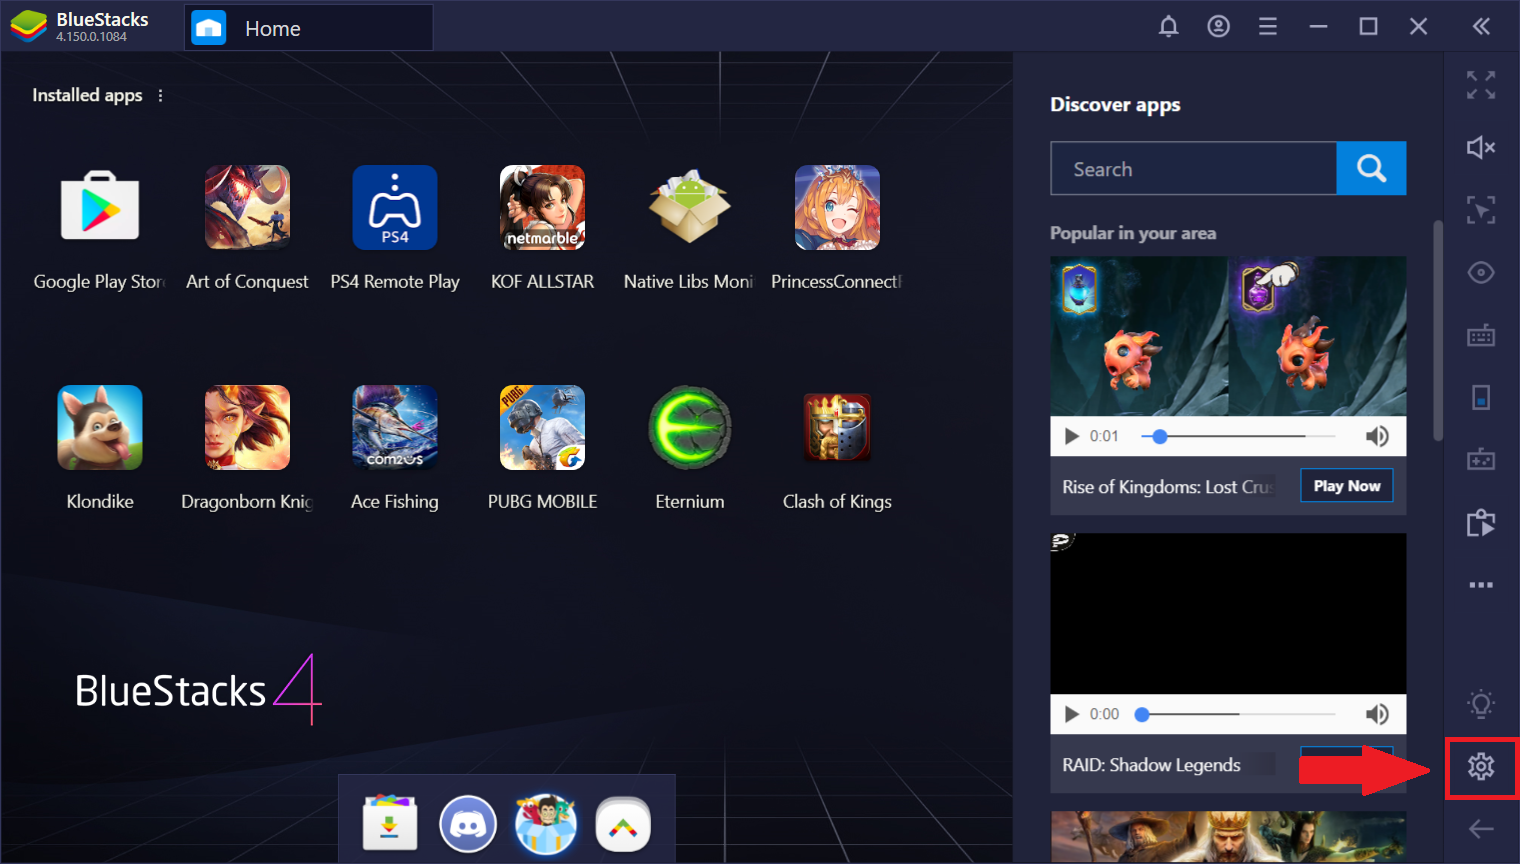 How To Switch Device Profile On Bluestacks 4 Bluestacks Support - finally updated my profile picture roblox amino